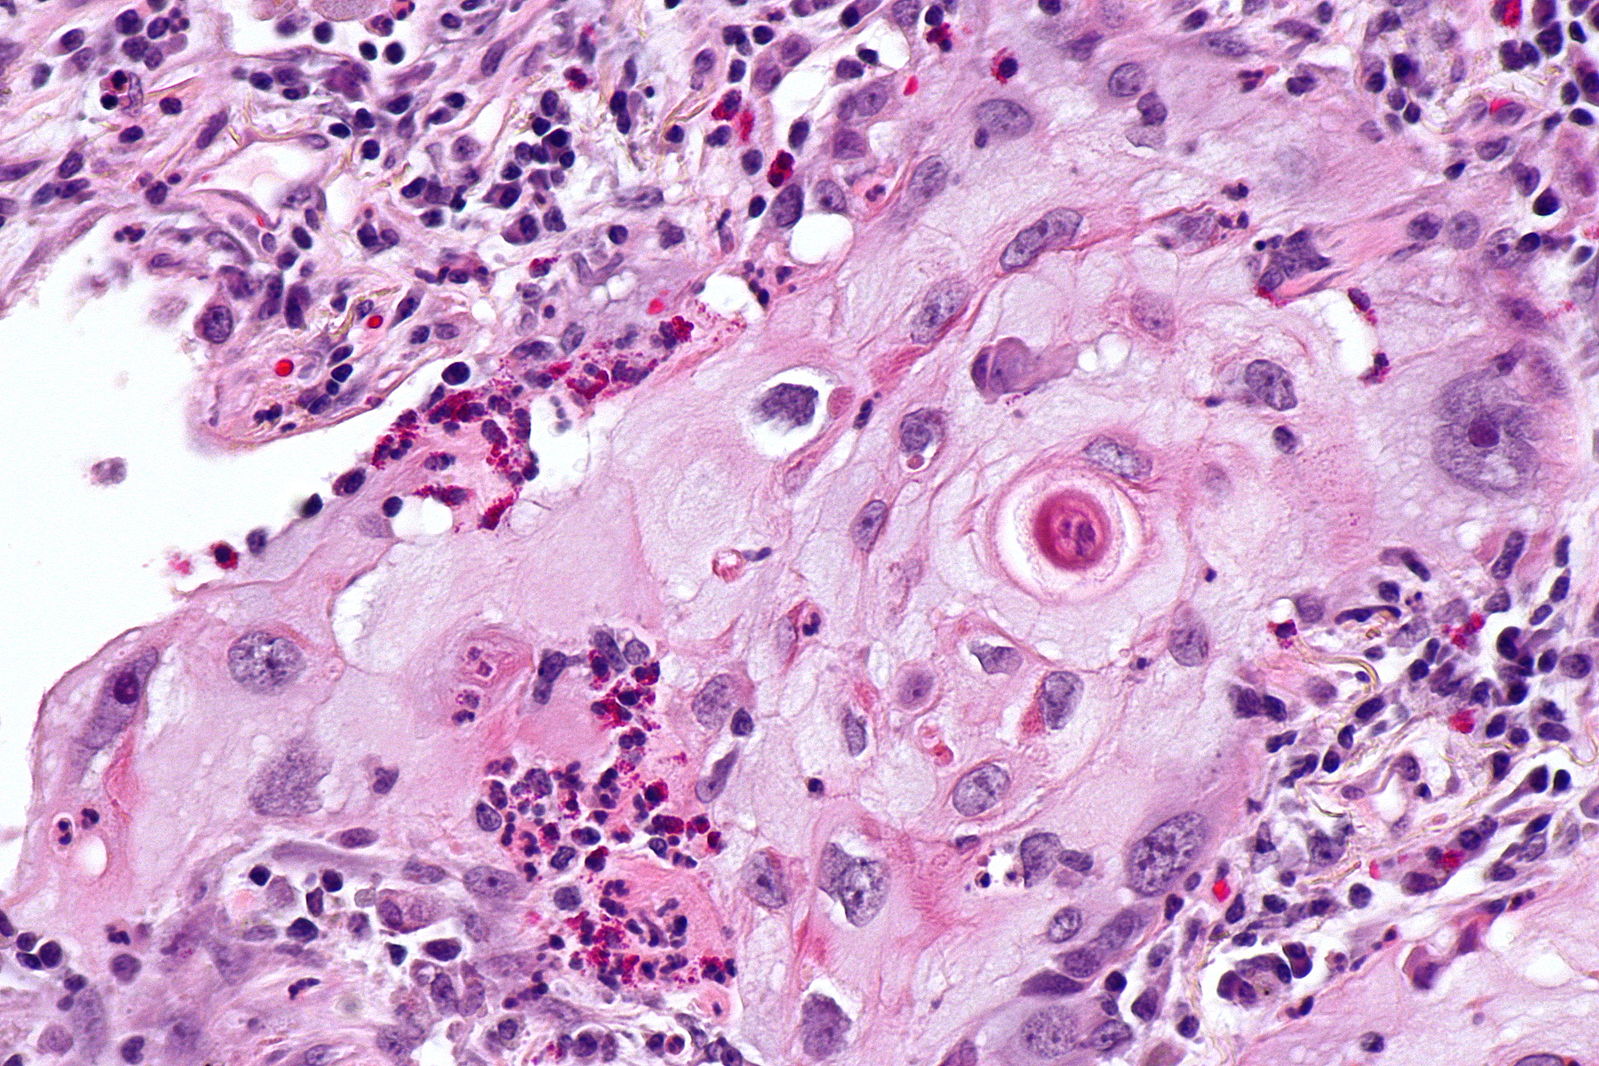 Micropathology: Squamous cell carcinoma of the lung. H&E stain via, Wikimedia Commons By Nephron [8]